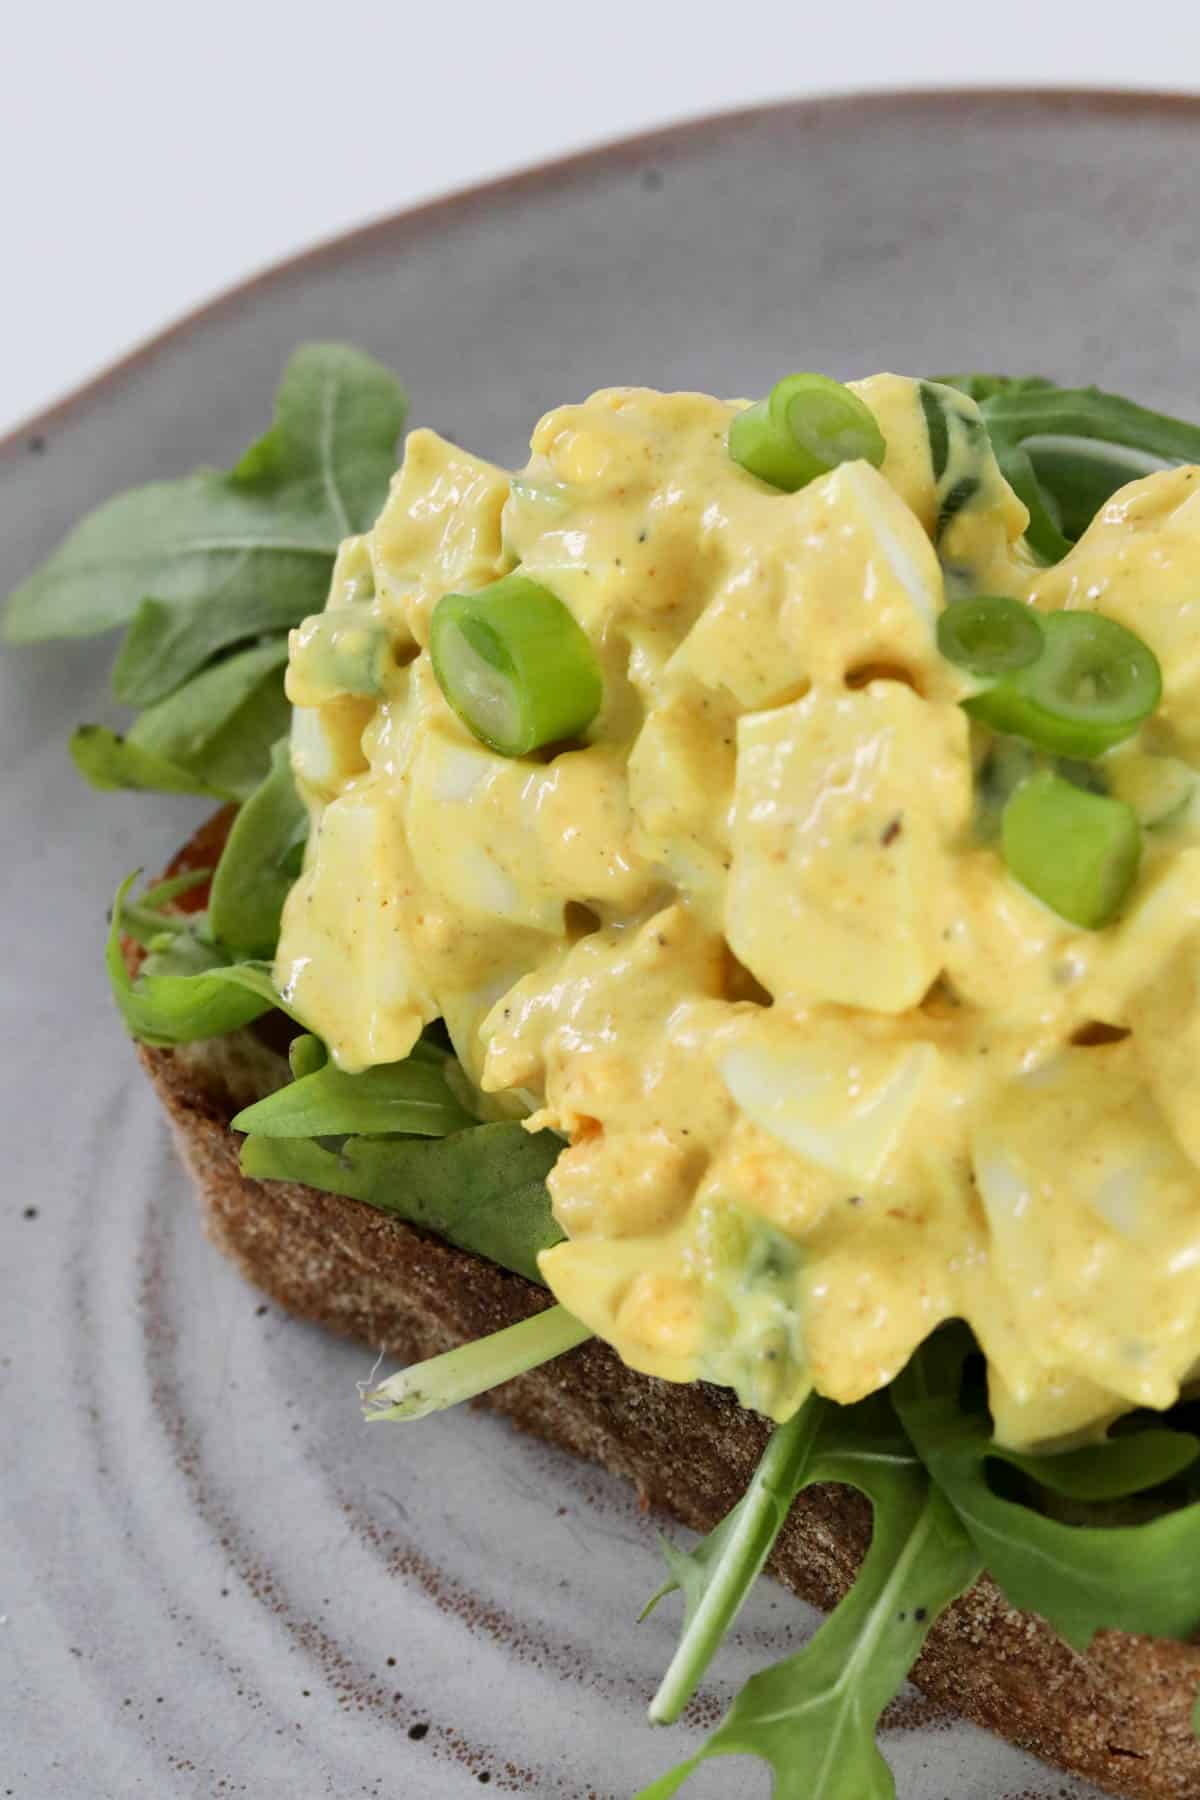 A close up of egg salad on lettuce and rye bread.